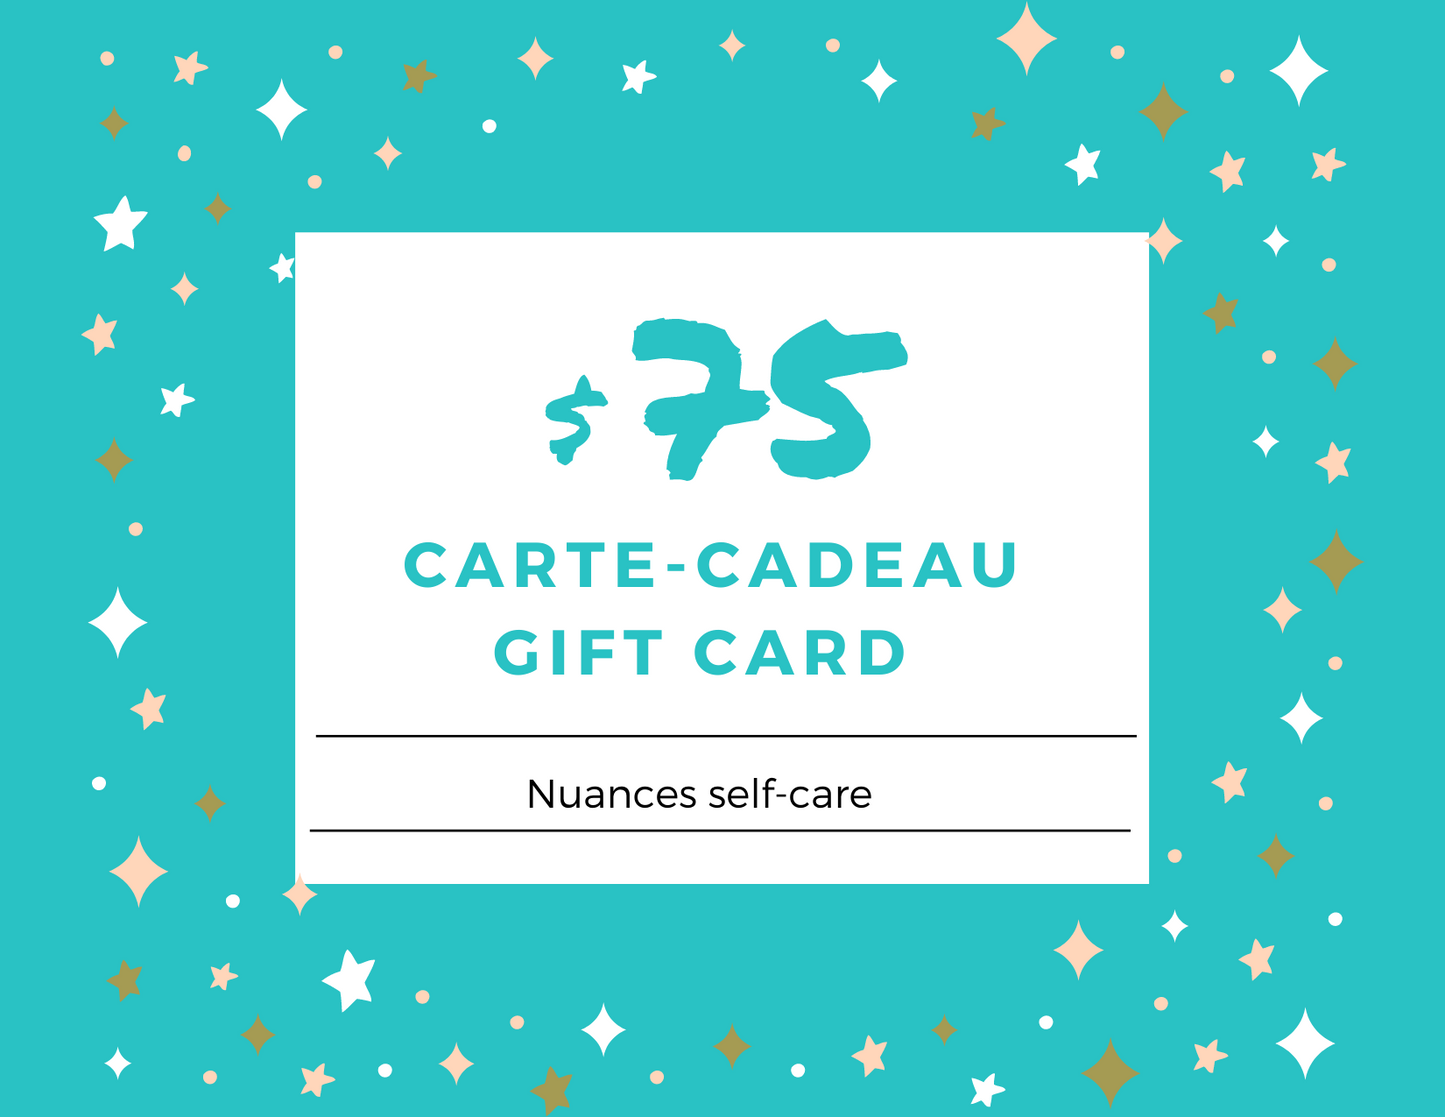 Nuances Gift Card